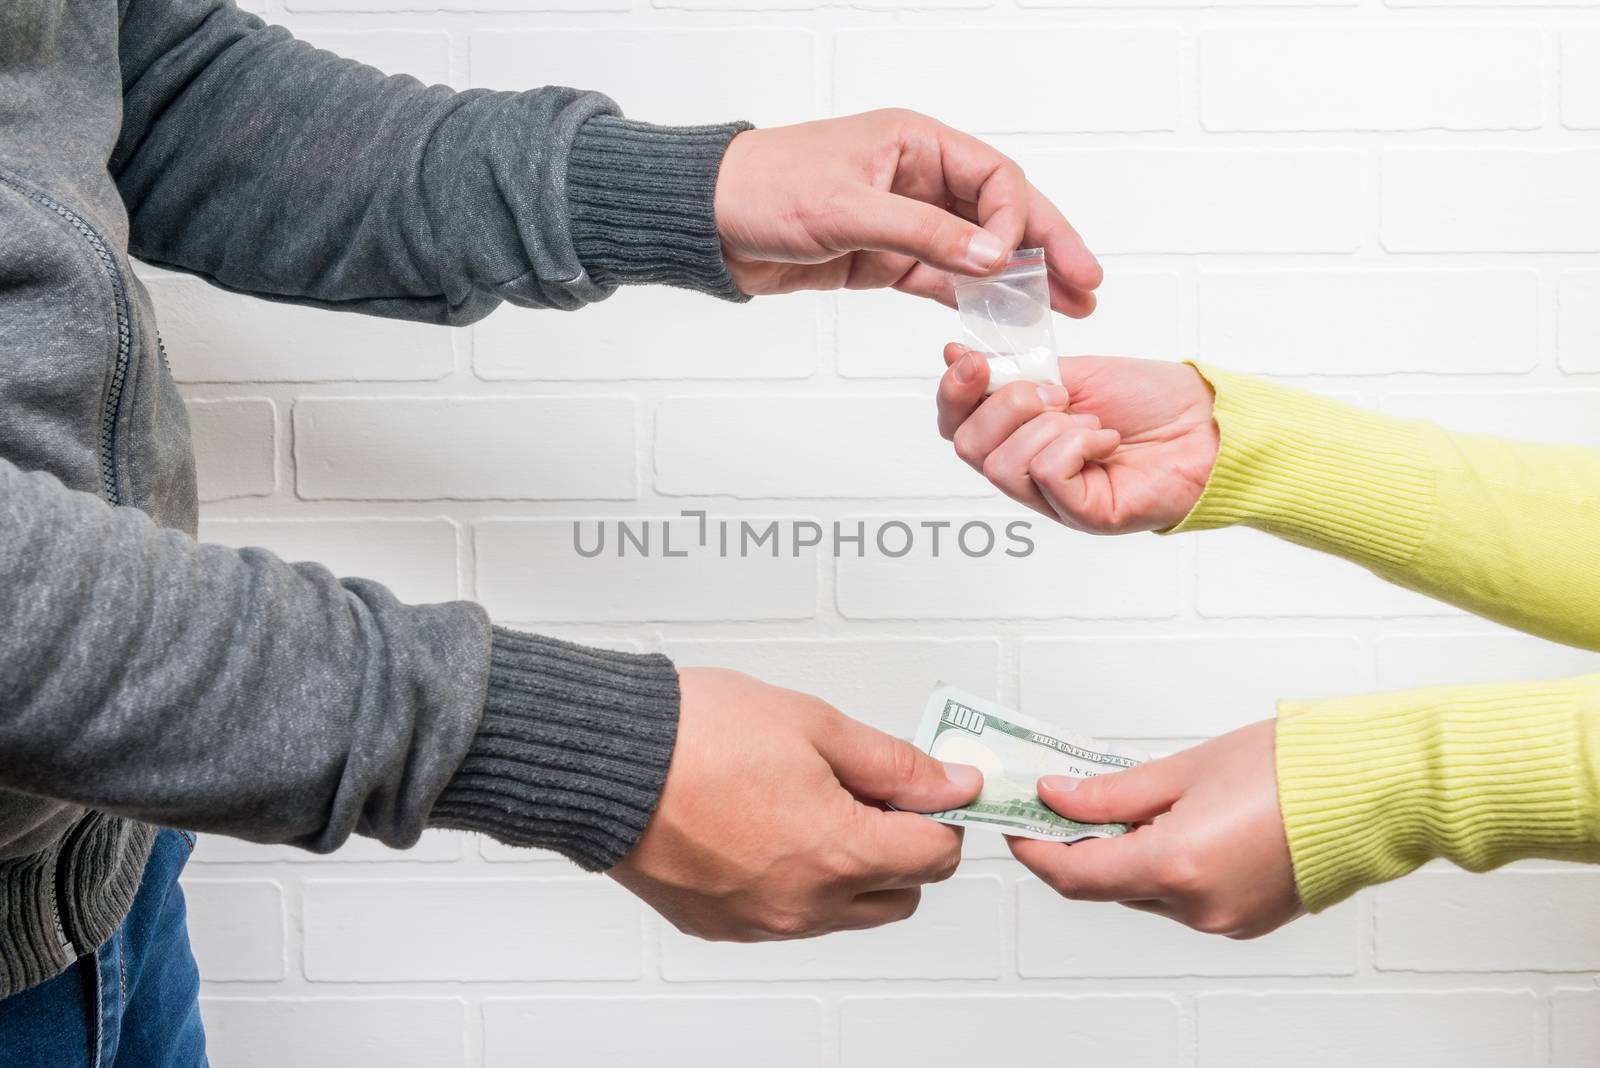 Woman drug addict buys drugs from a man, hands close-up by kosmsos111